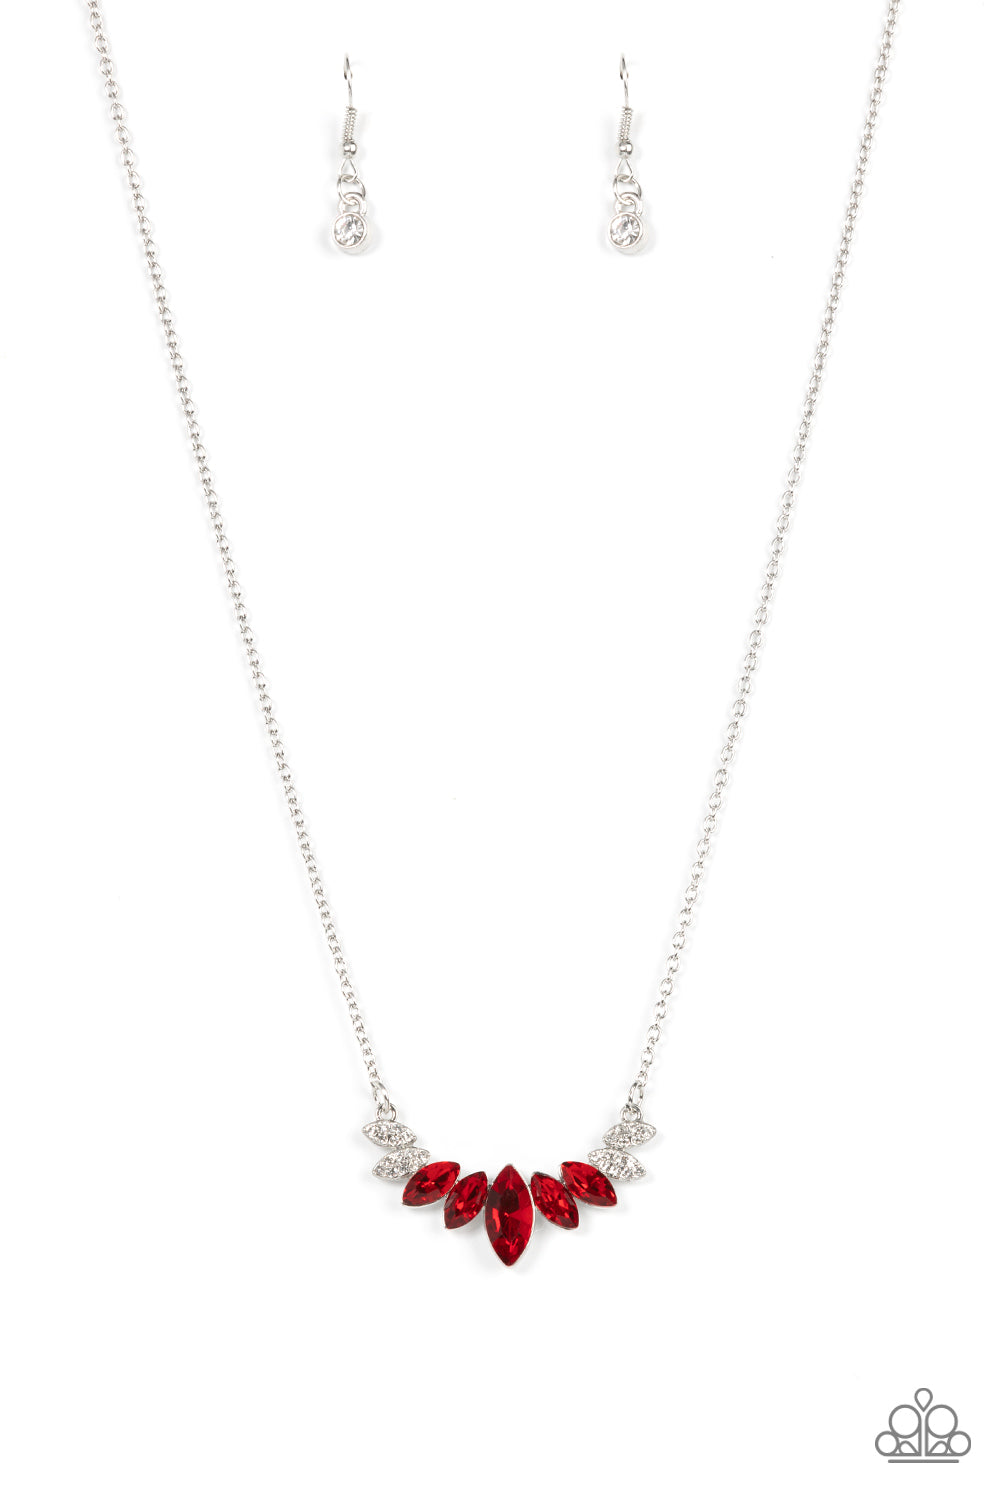 five-dollar-jewelry-one-empire-at-a-time-red-paparazzi-accessories